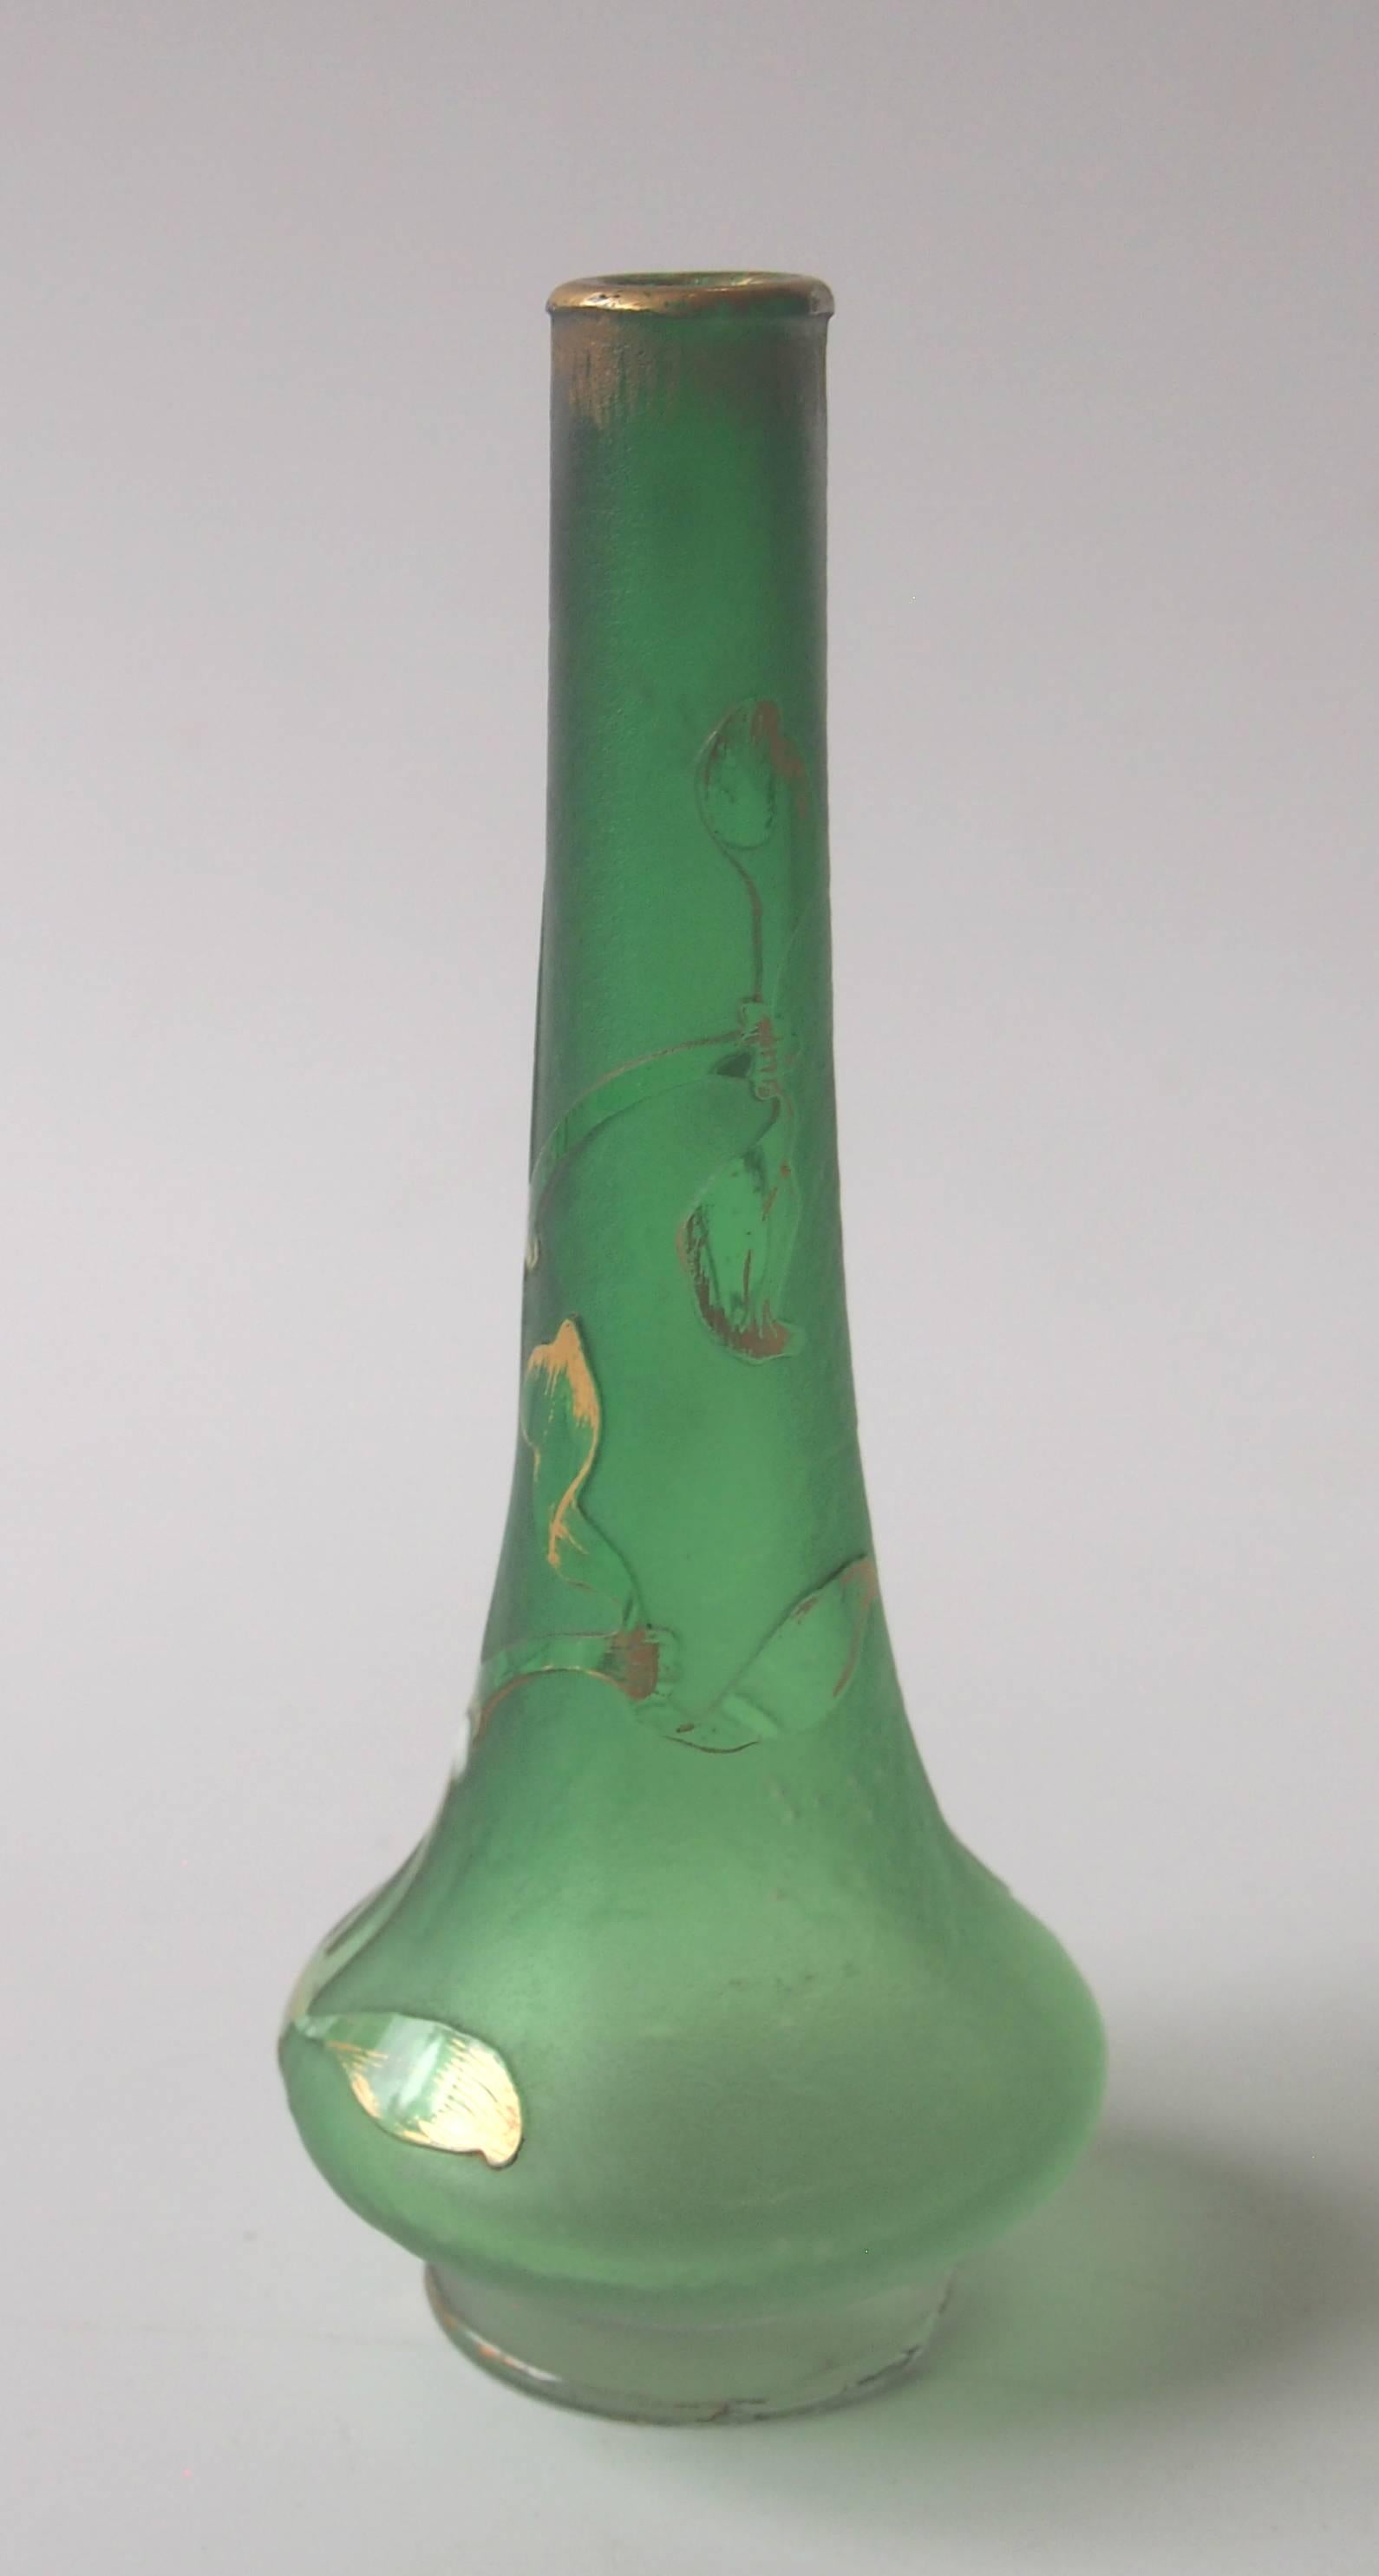 Small green to clear, gilded and applied raised enamel Daum Mistletoe vase, the mistletoe berries are enameled with raised white enamel. Signed 'Daum Nancy' to the base. Mistletoe was one of the most significant iconic Art Nouveau images.